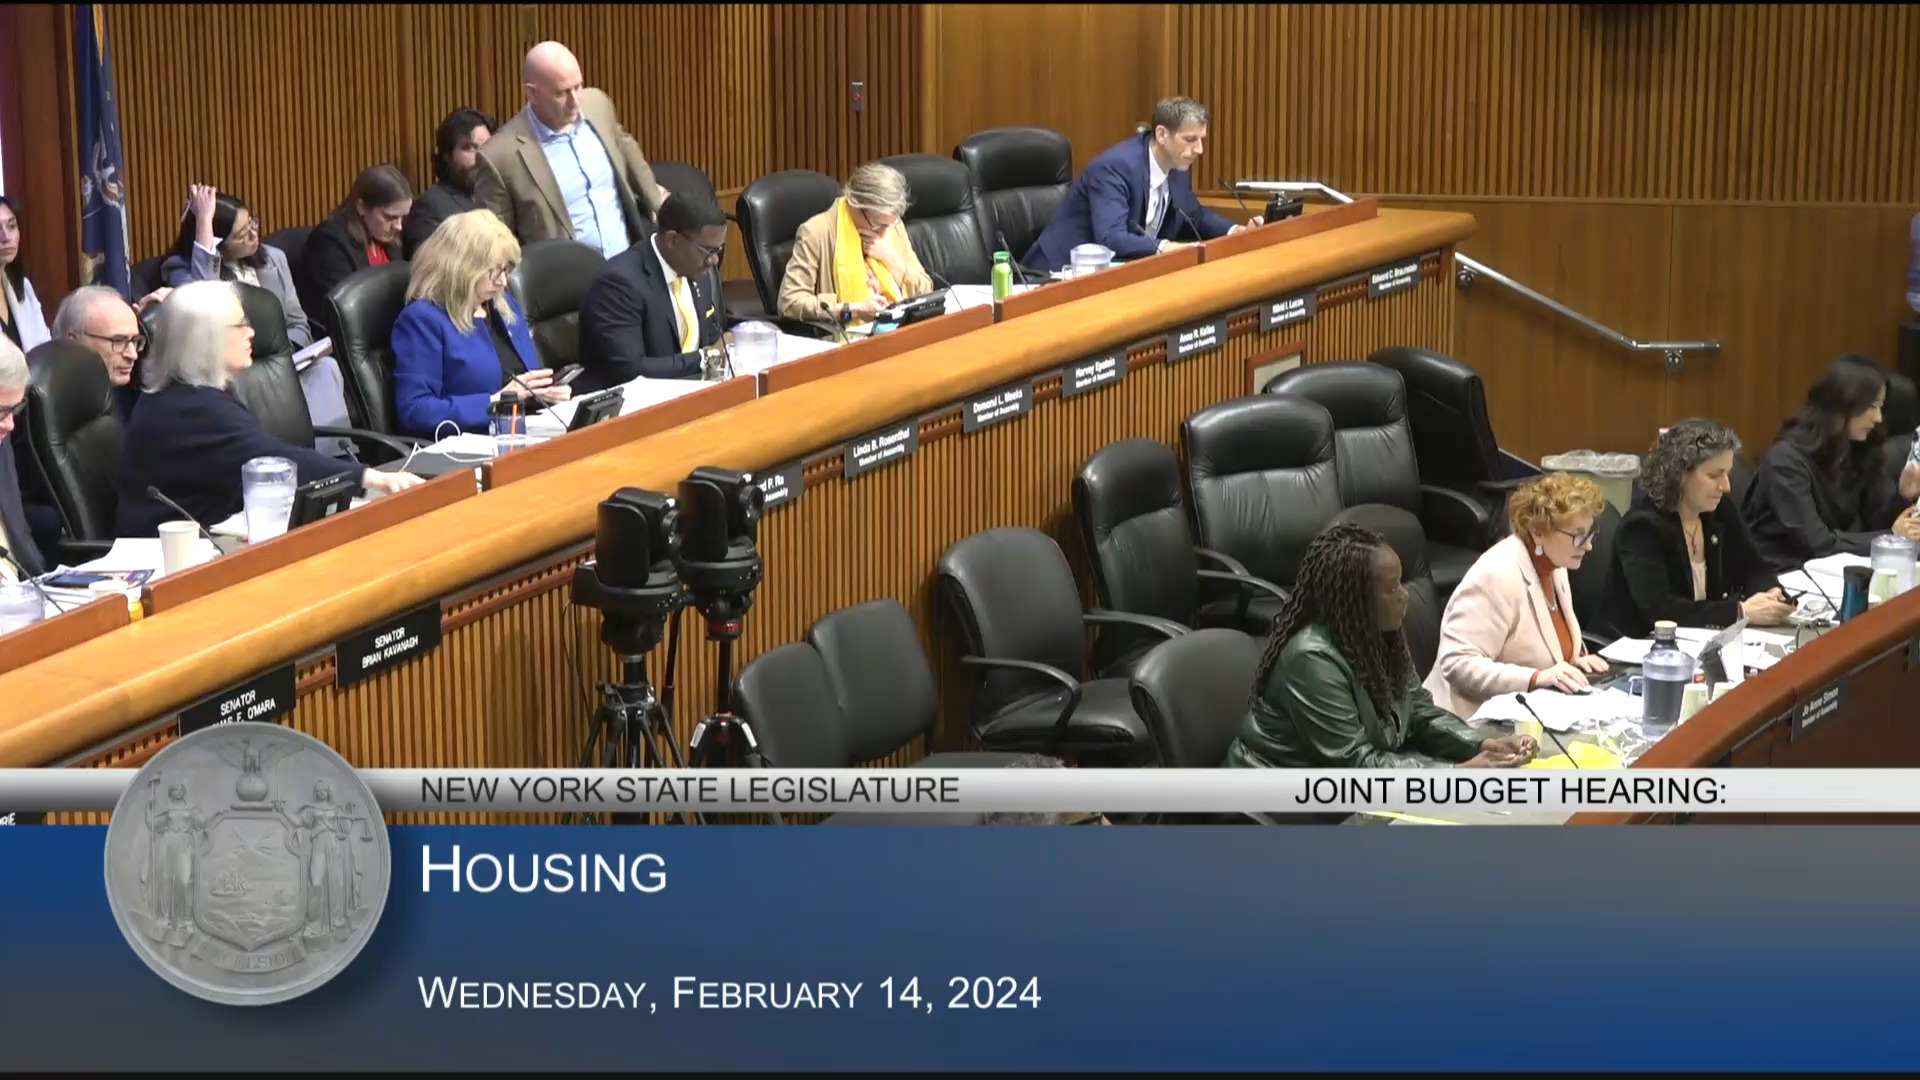 NYS Homes & Community Renewal Commissioner Testifies During Budget Hearing on Housing